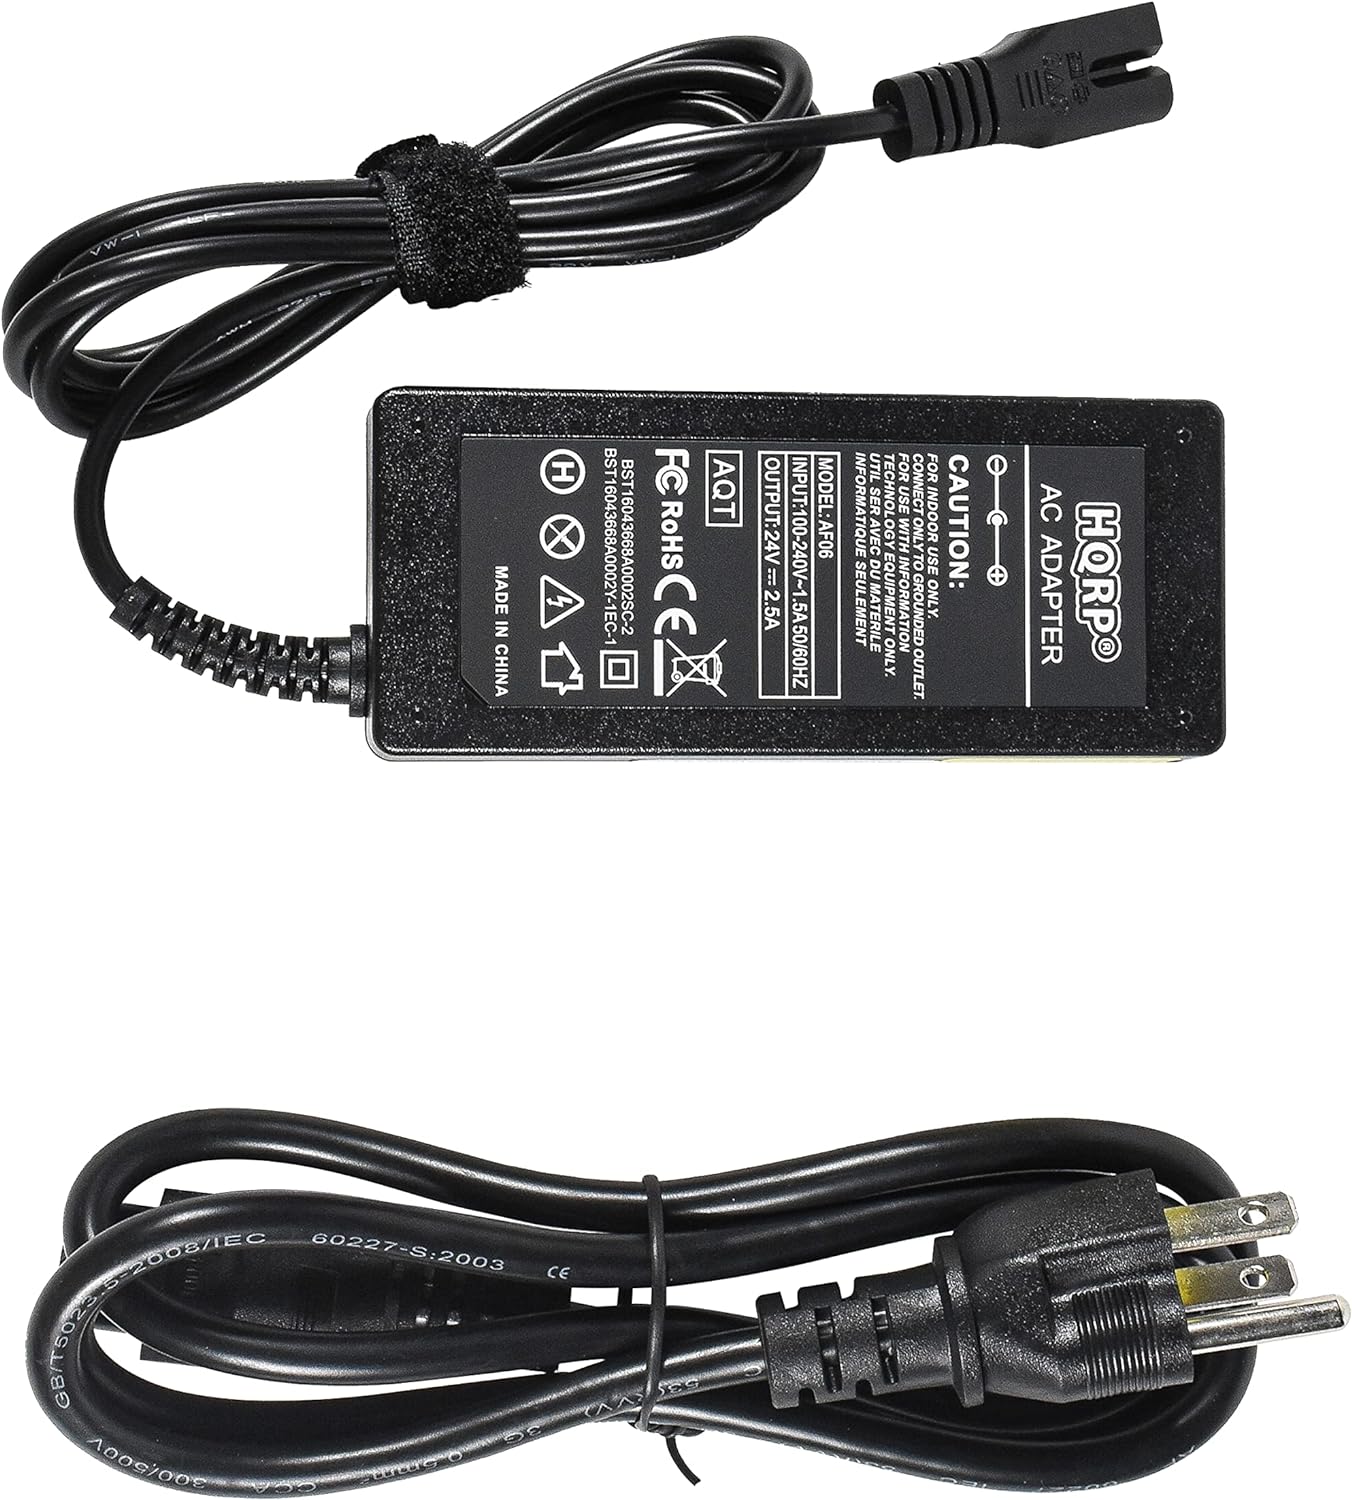 AC Adapter Compatible with UComfy Innov 8072 8954 4A201201 Innov IVP2400-2500 Foot Massager Emson Power Supply Cord Adap